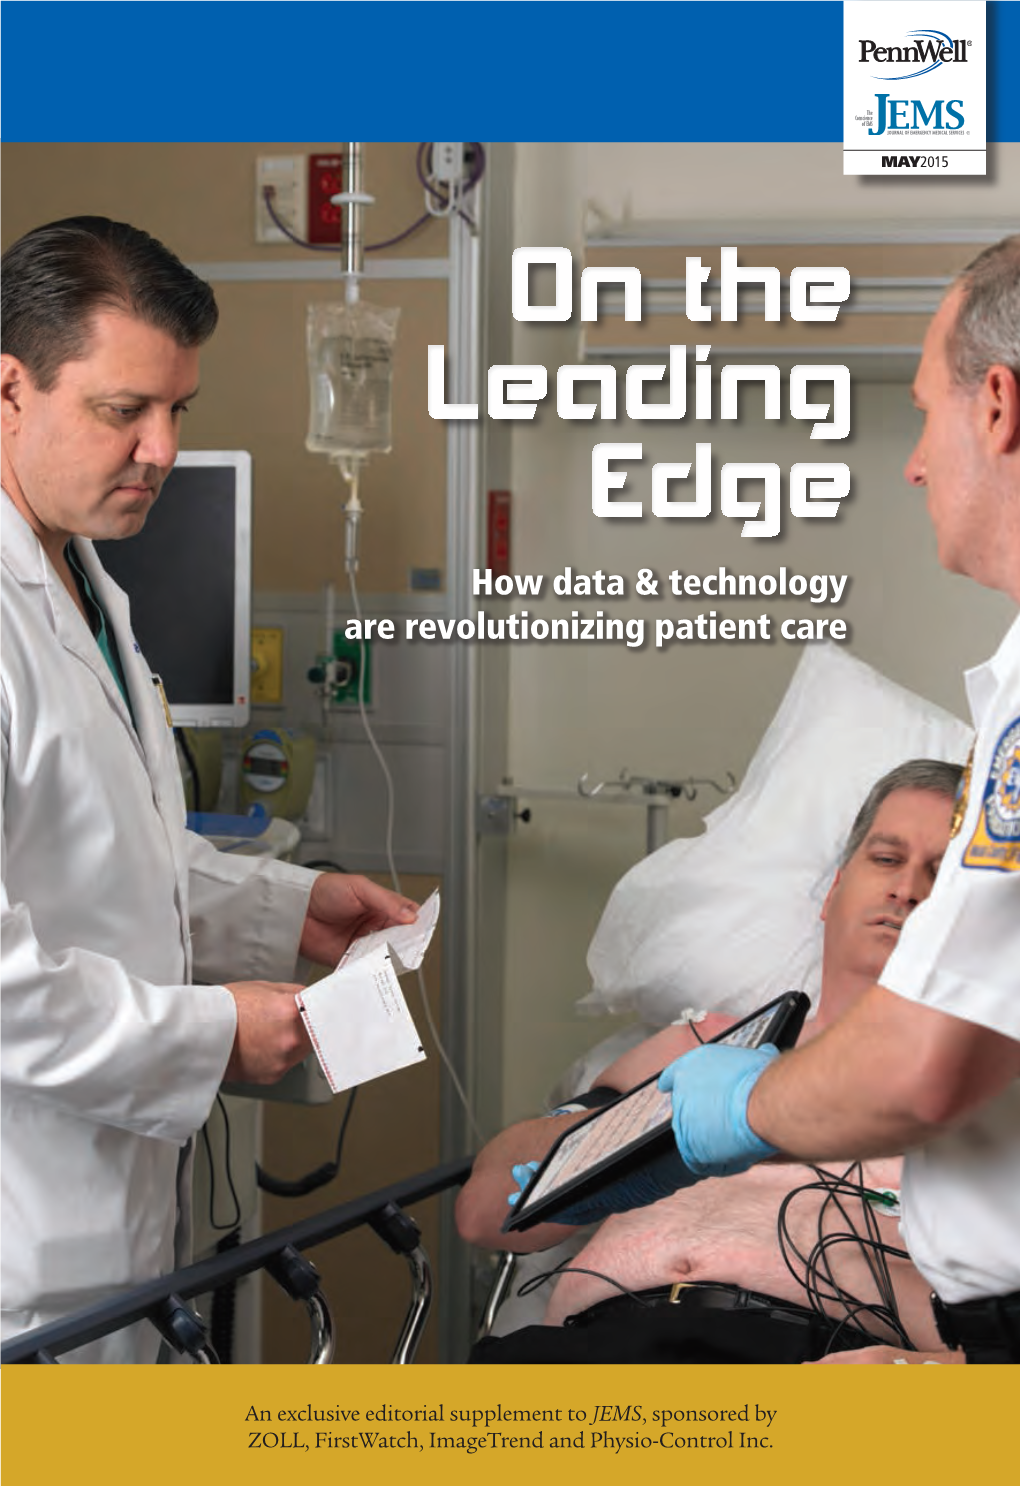 How Data & Technology Are Revolutionizing Patient Care